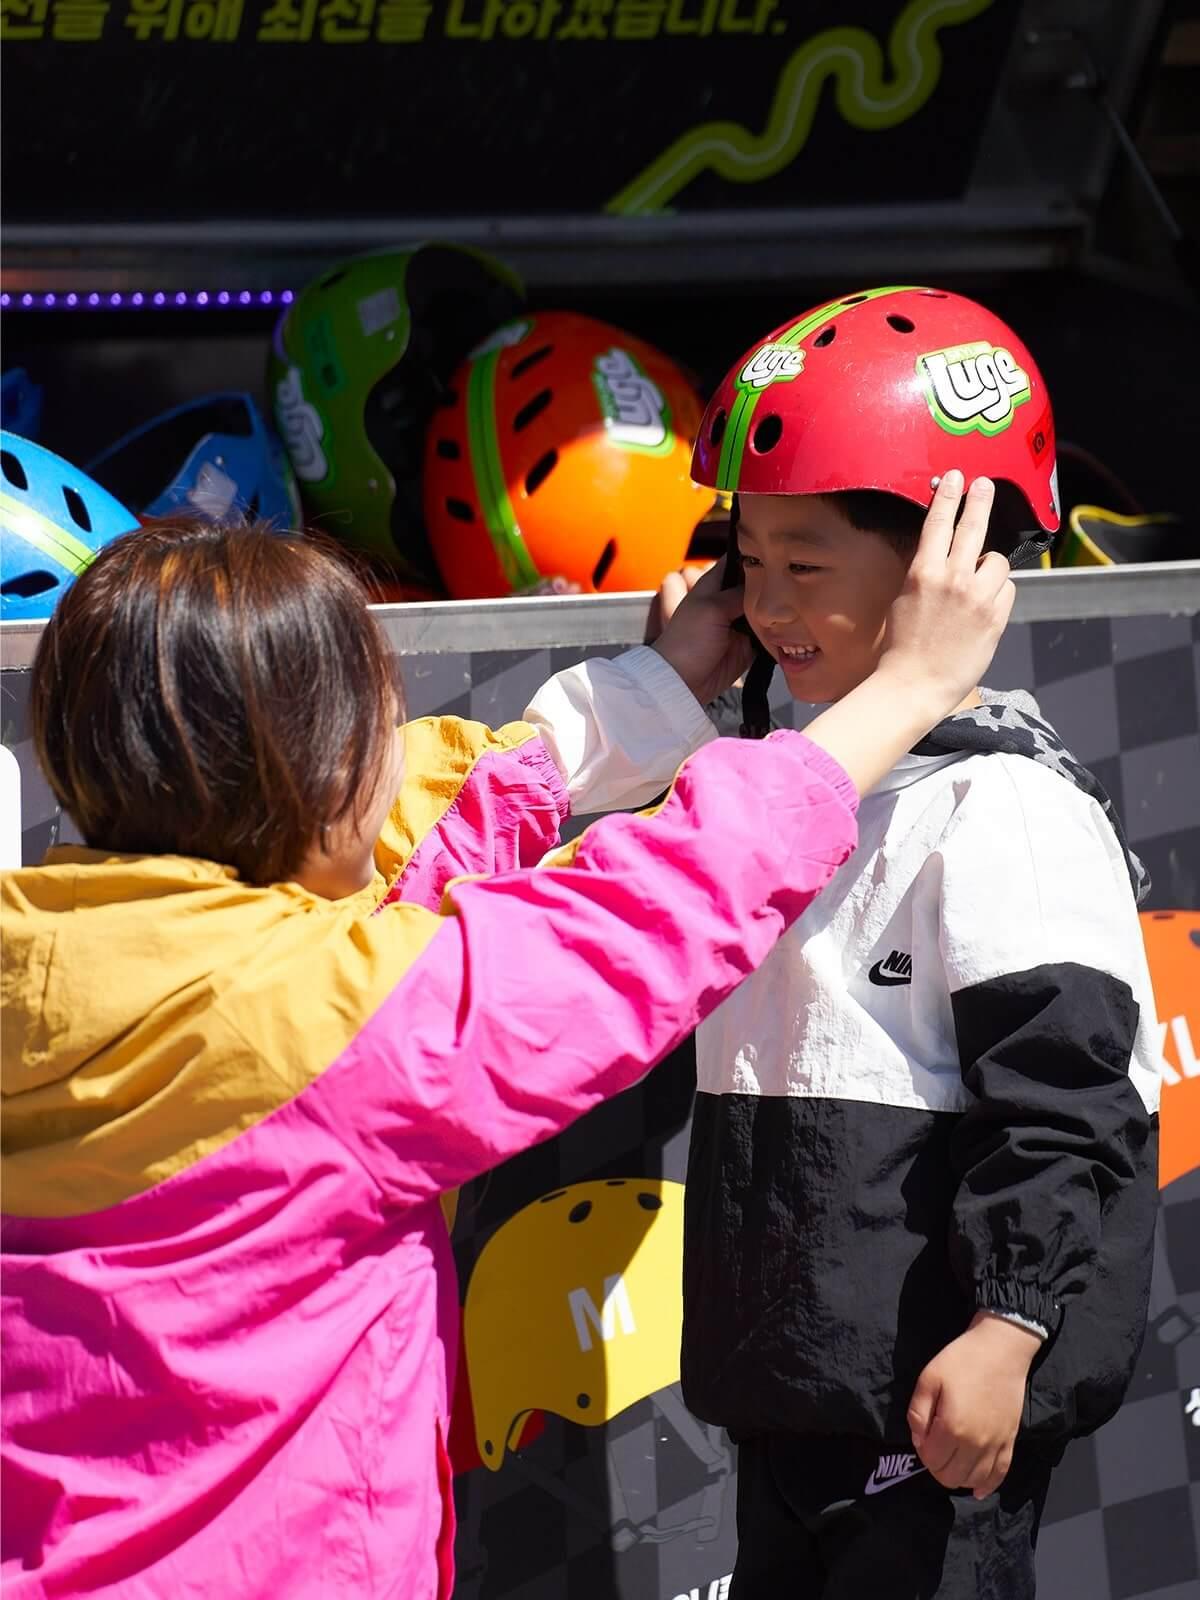 A small child gets his Luge helmet fitted by a parent.